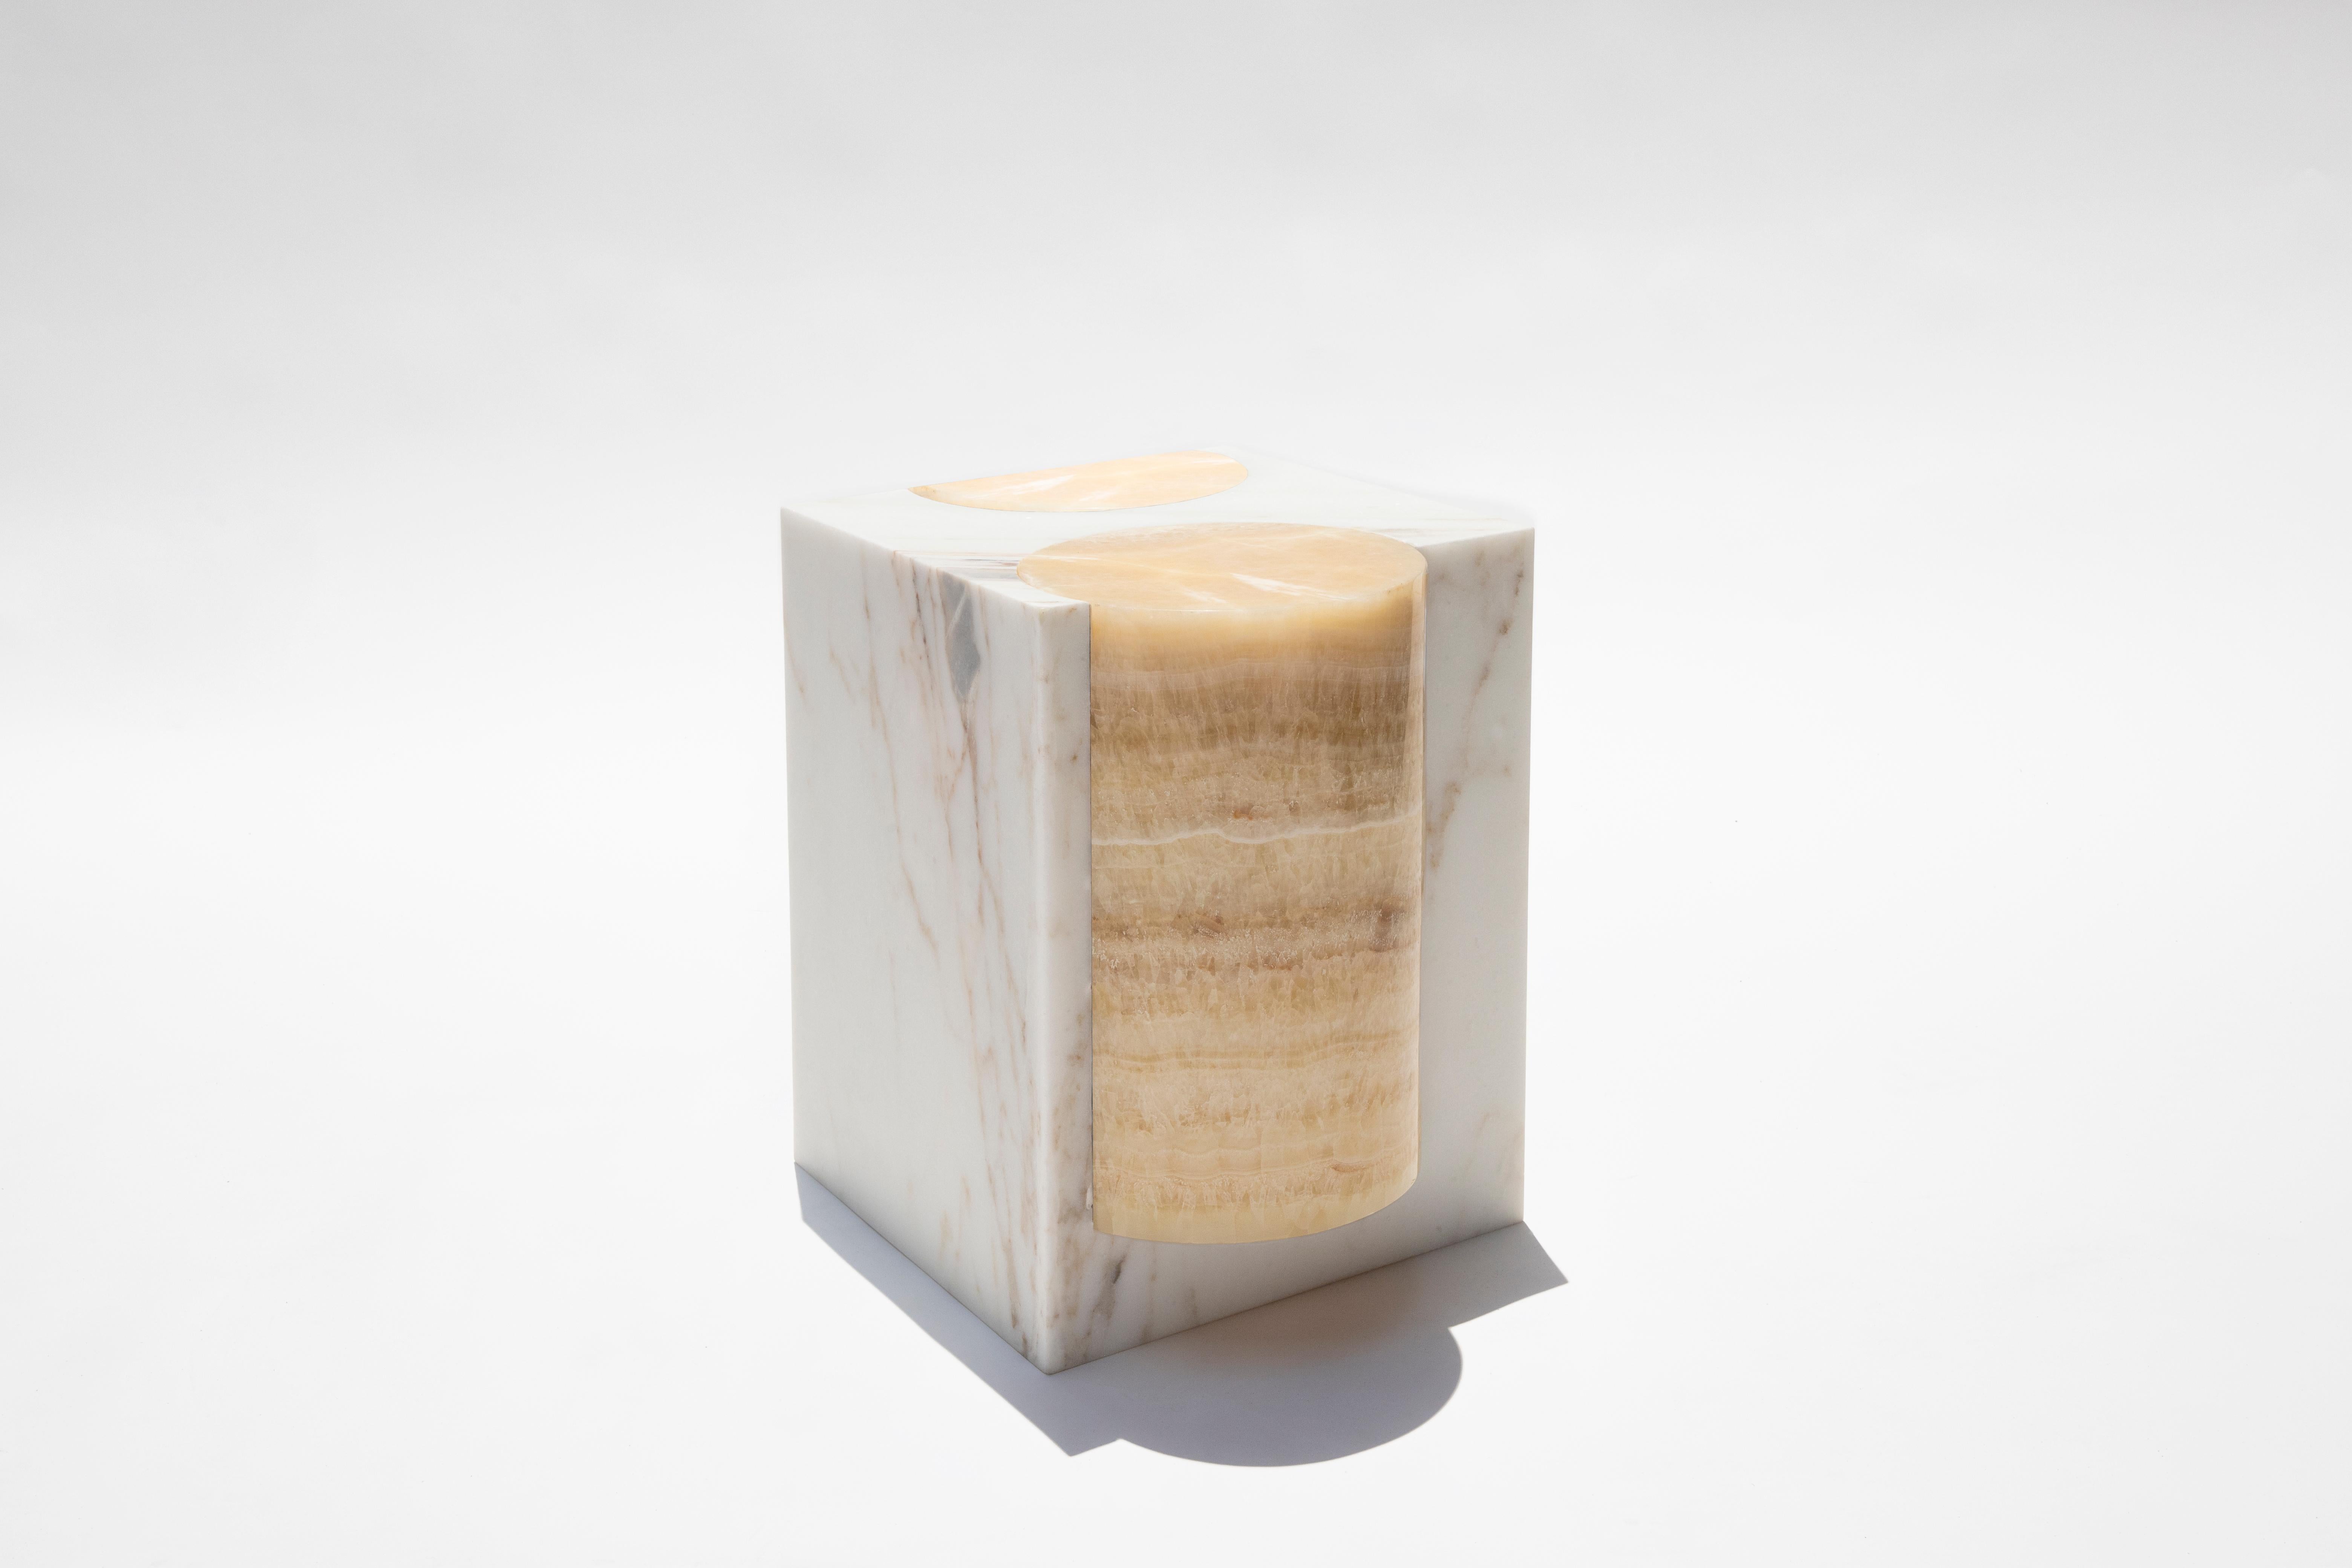 Mexican Volcanic Shade of Marble I Stool/Table by Sten Studio, REP by Tuleste Factory